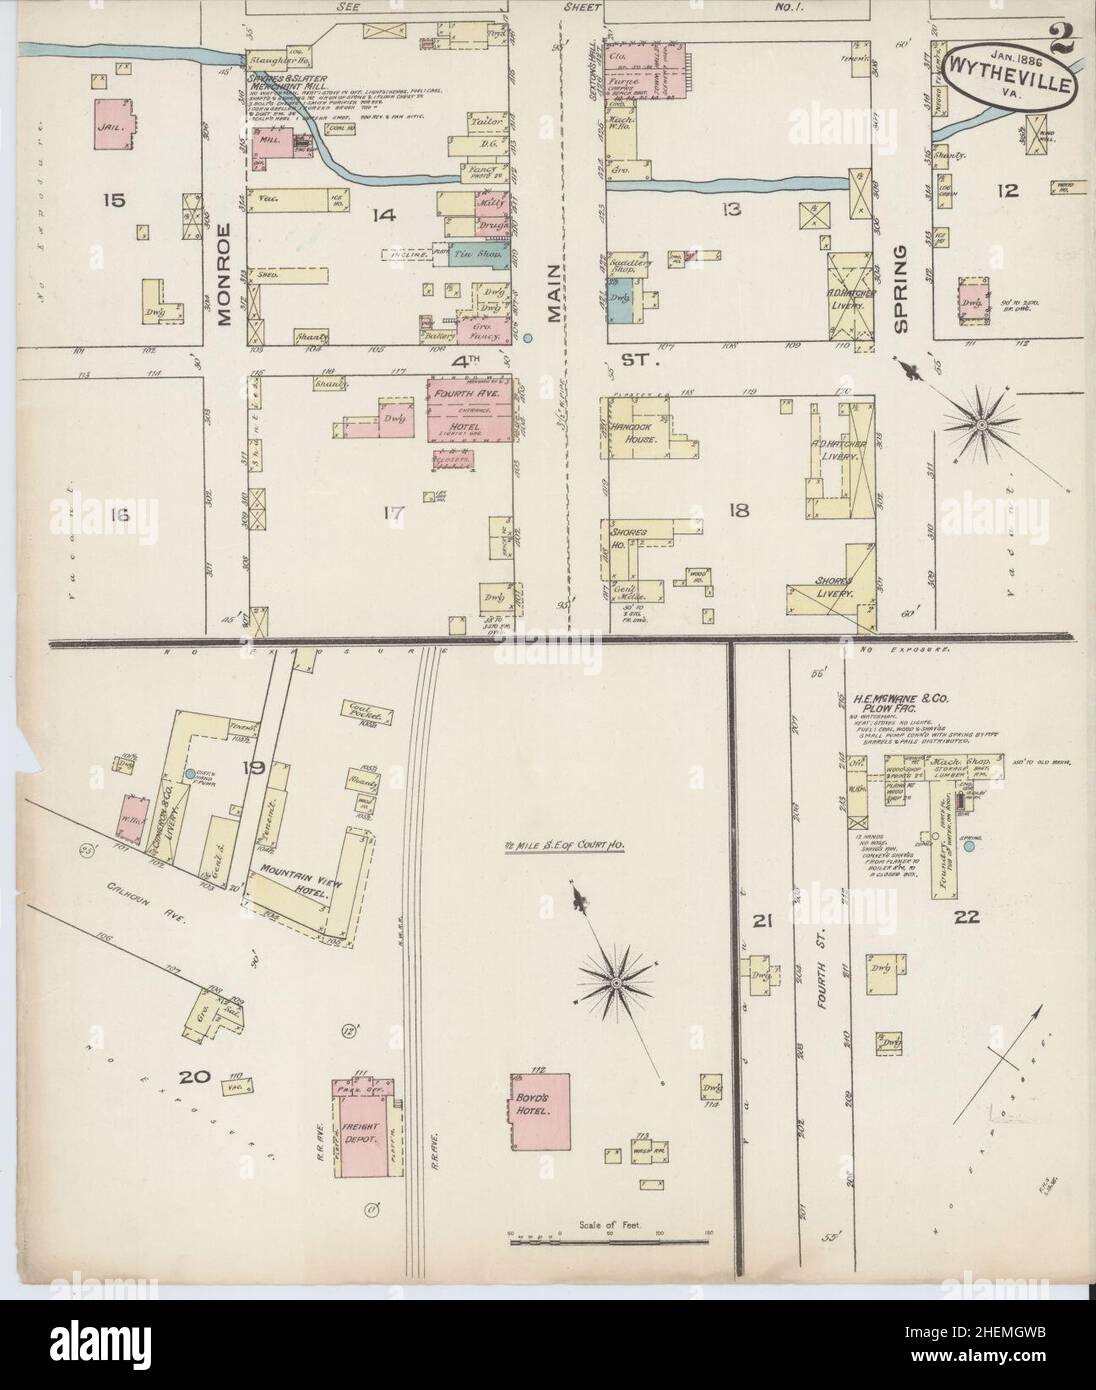 Sanborn Fire Insurance Map from Wytheville, Wythe County, Virginia. Stock Photo